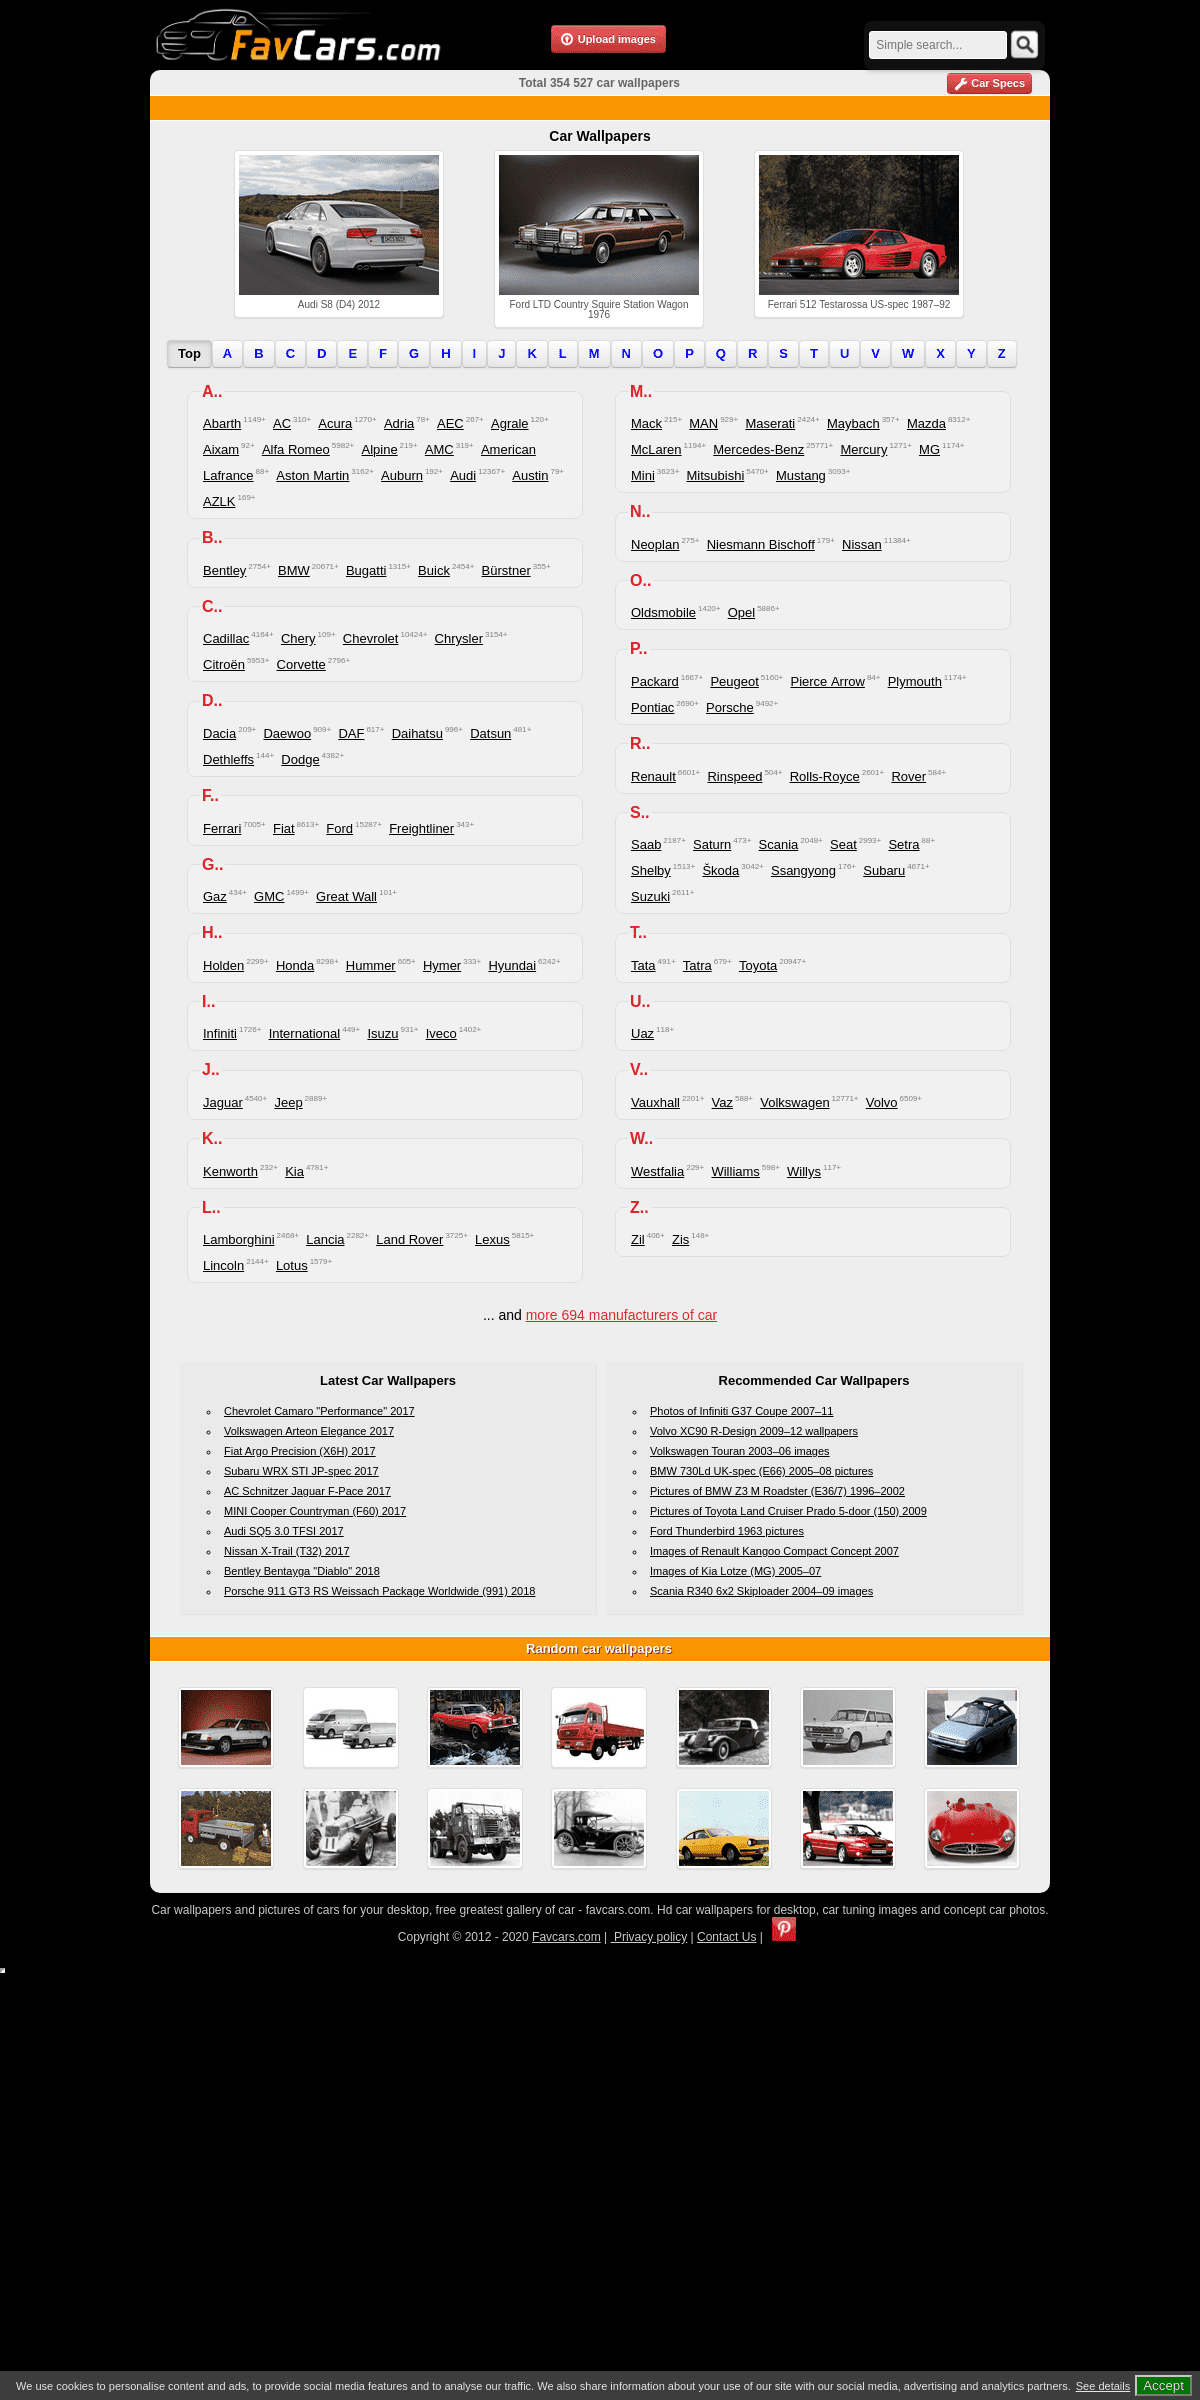 A complete backup of favcars.com